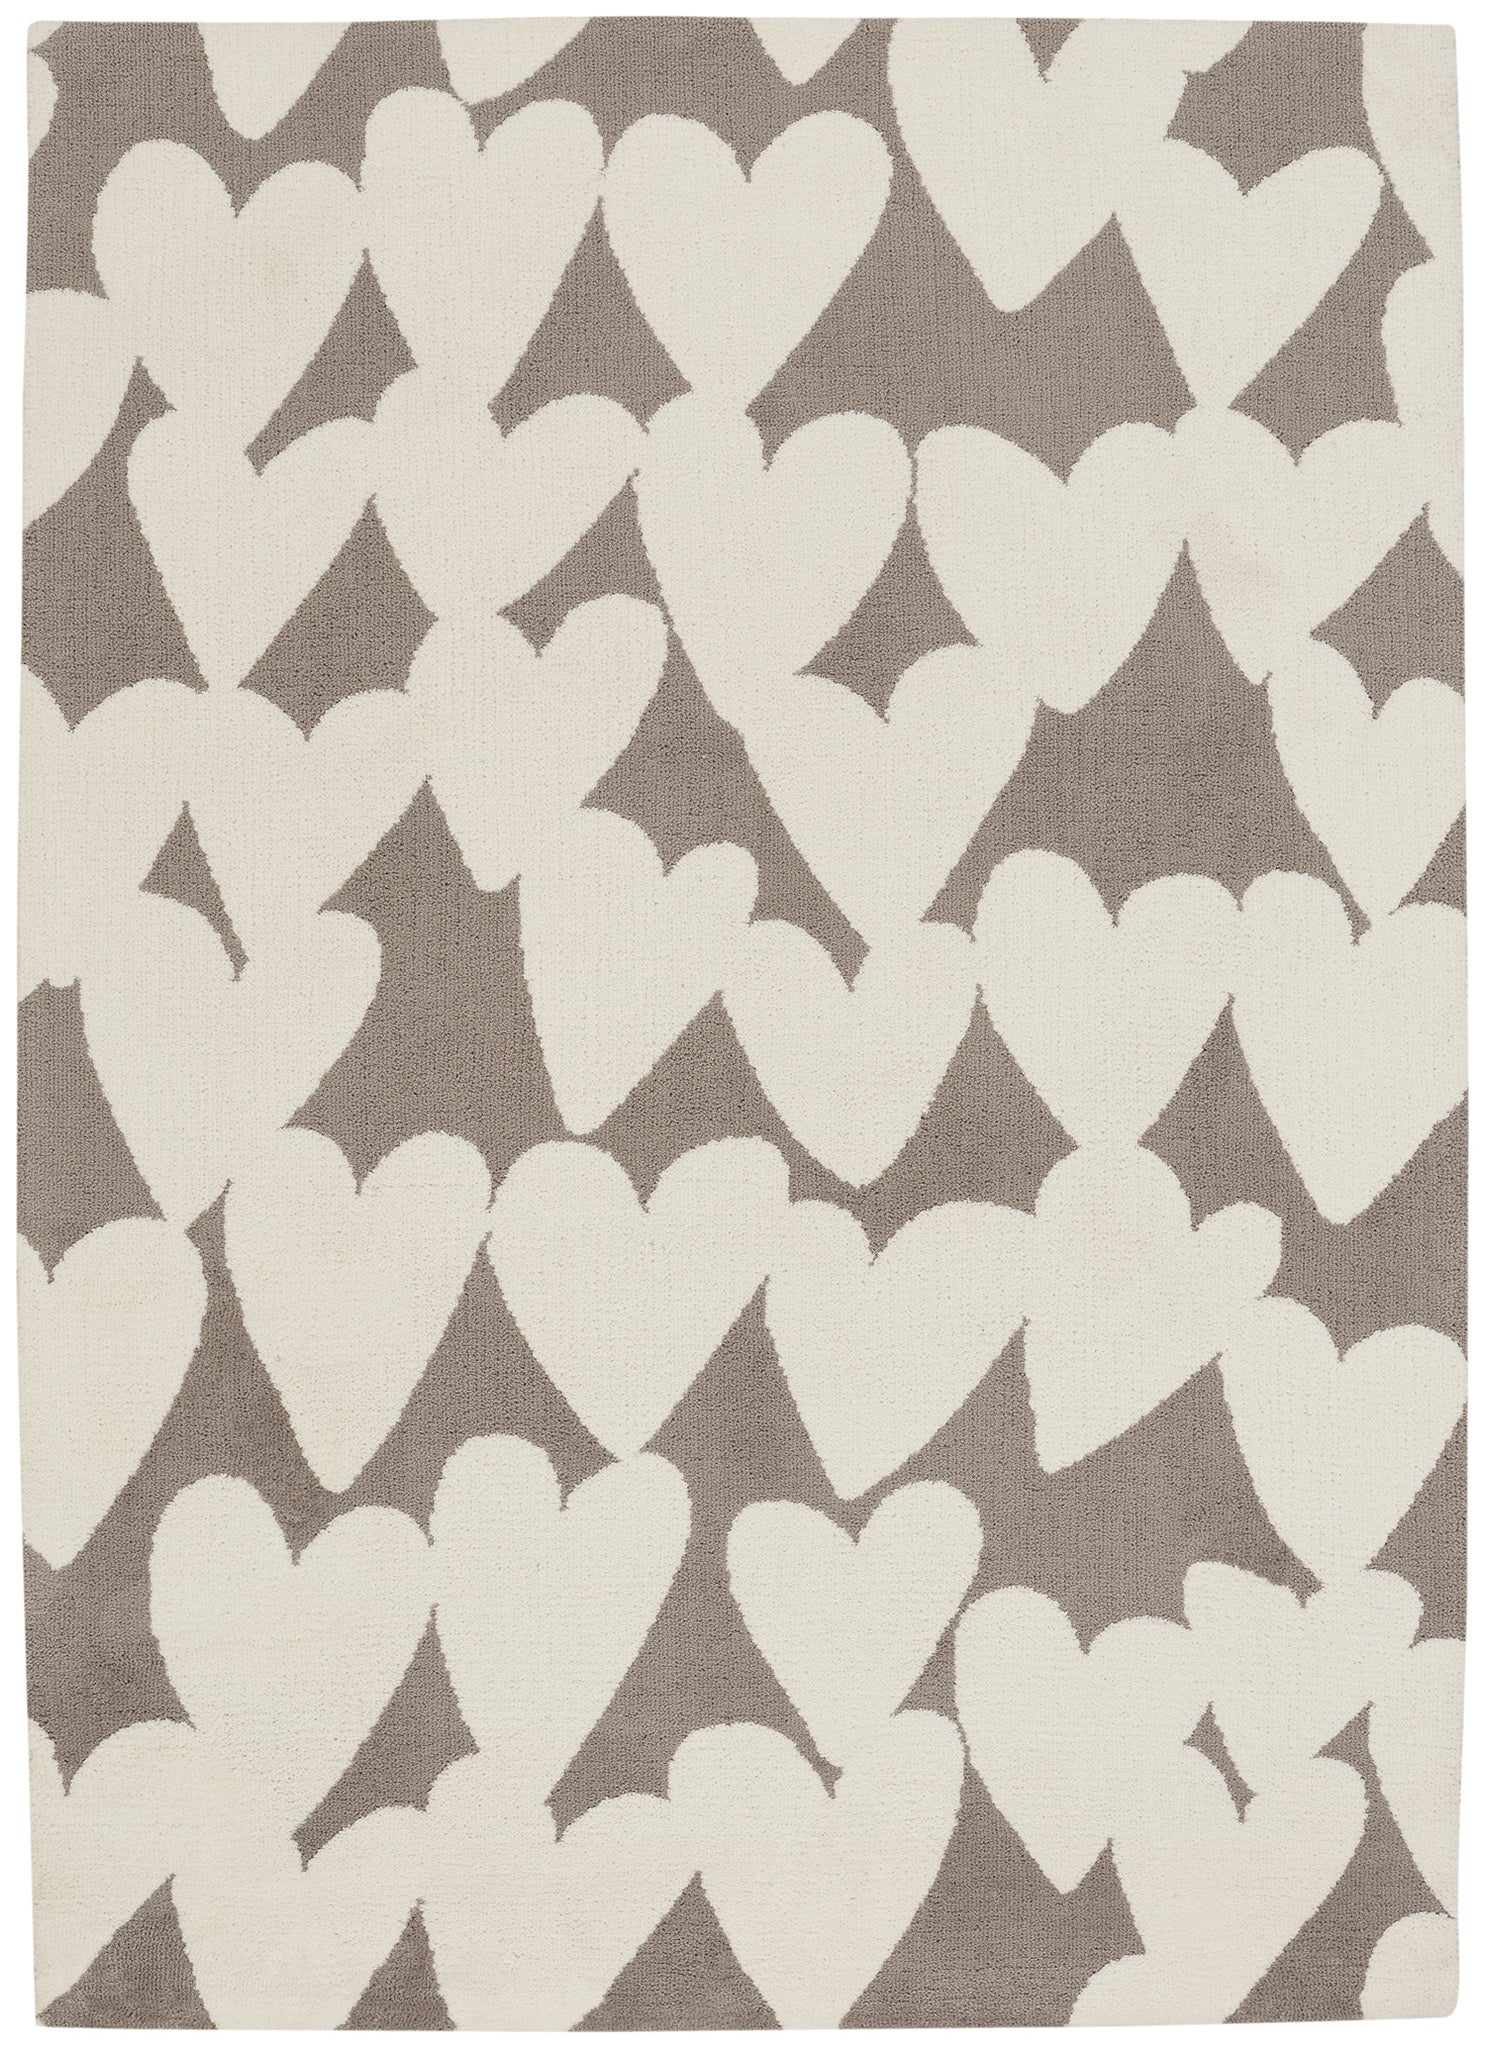 Capel Confectionary Valentine 6302 Silver 336 Area Rug by Hable Construction main image